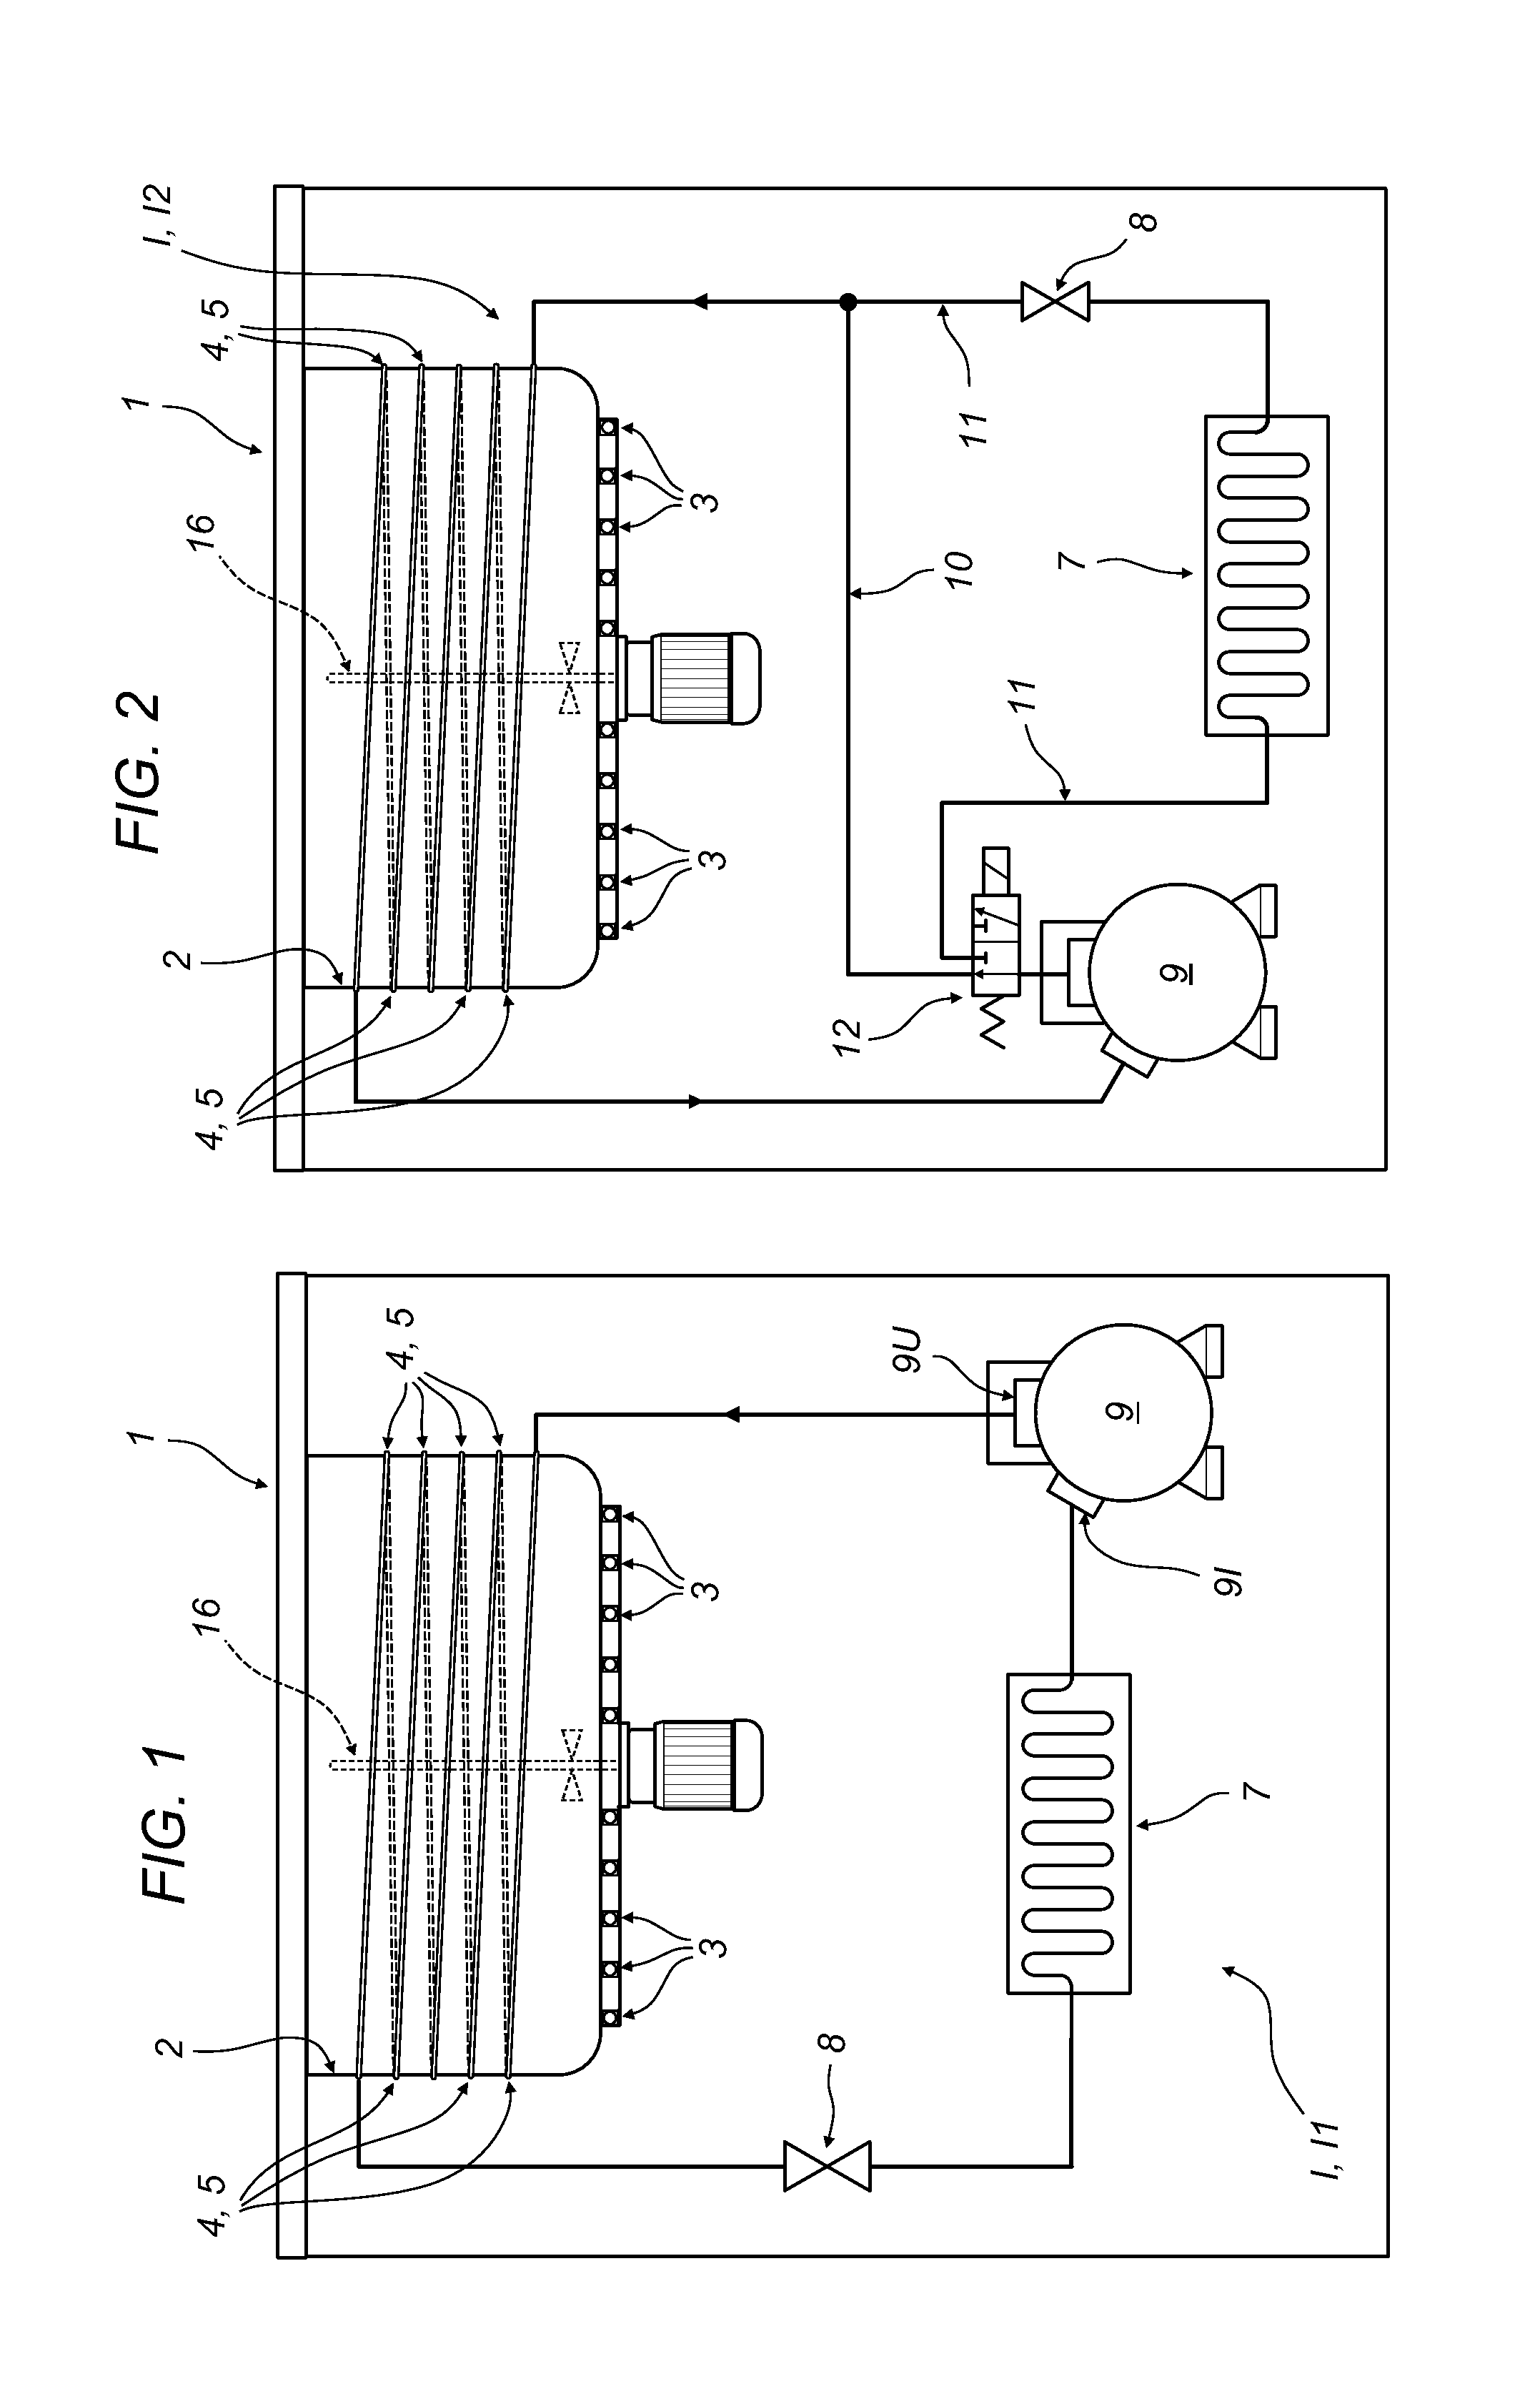 Machine and method for the thermal treatment of liquid and semi-liquid food products